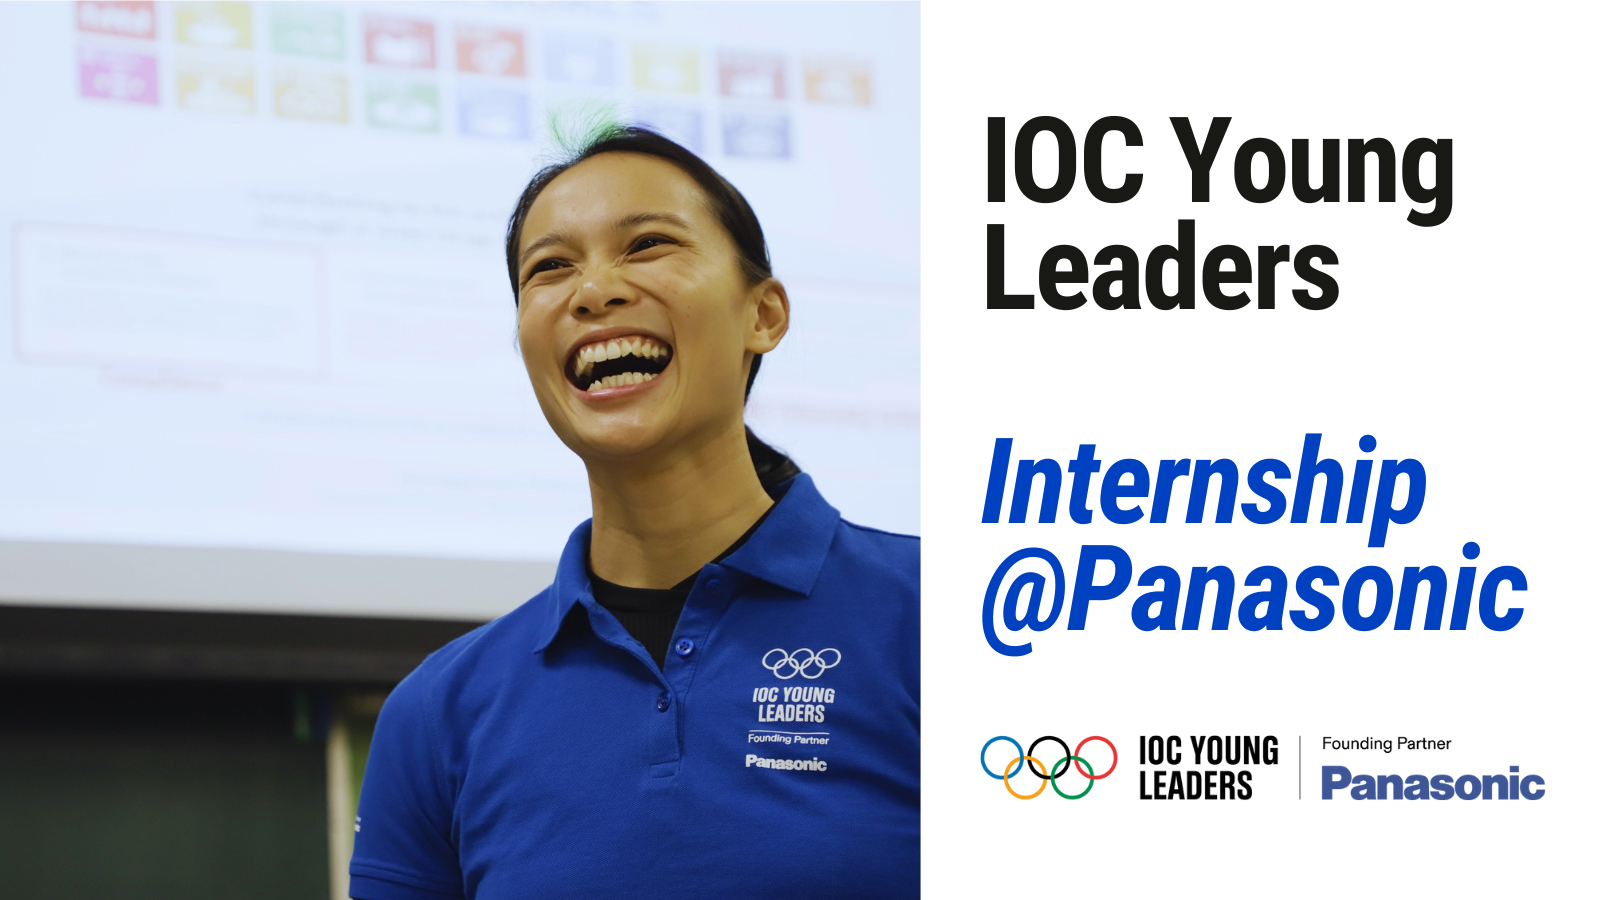 IOC Young Leader’s Personal Story of Internship Program Offered by Panasonic